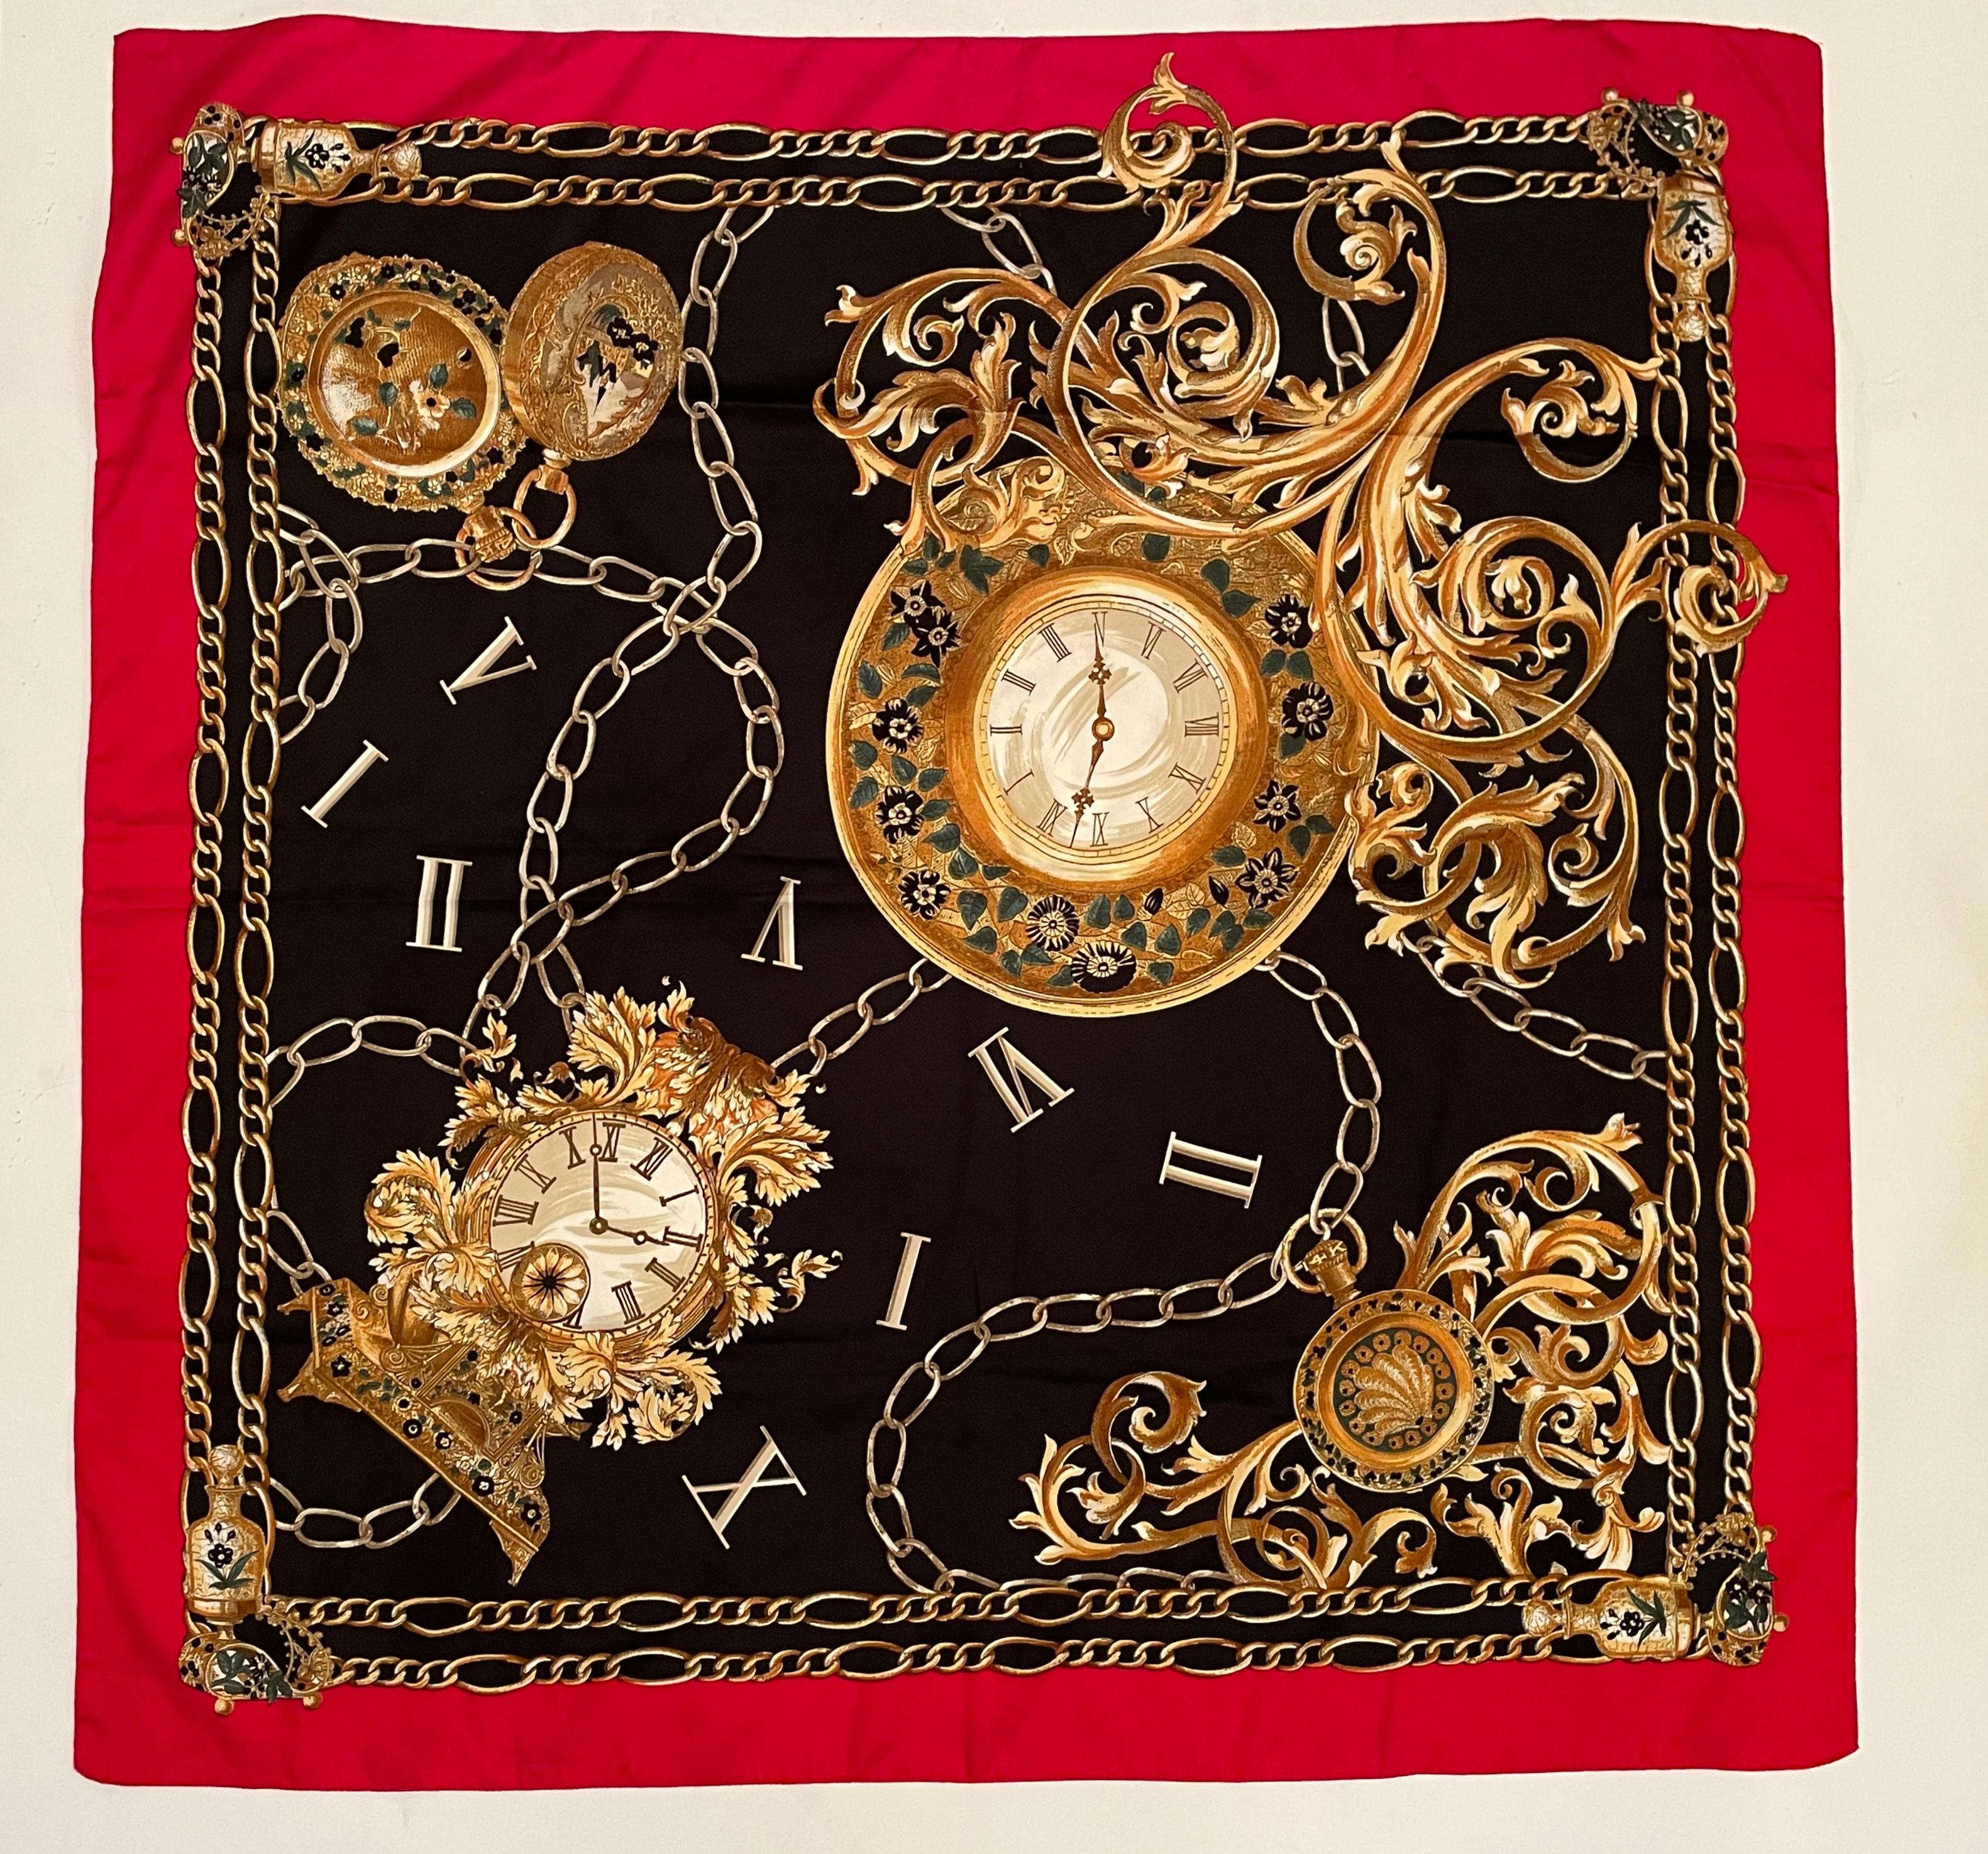 A gorgeous vintage Hermes style design scarf featuring large and small victorian clocks, wall clocks, pocket clocks and roman numbers with gold chains around.
Print in gold colors on black background with a red border.
The colors are rich and bold